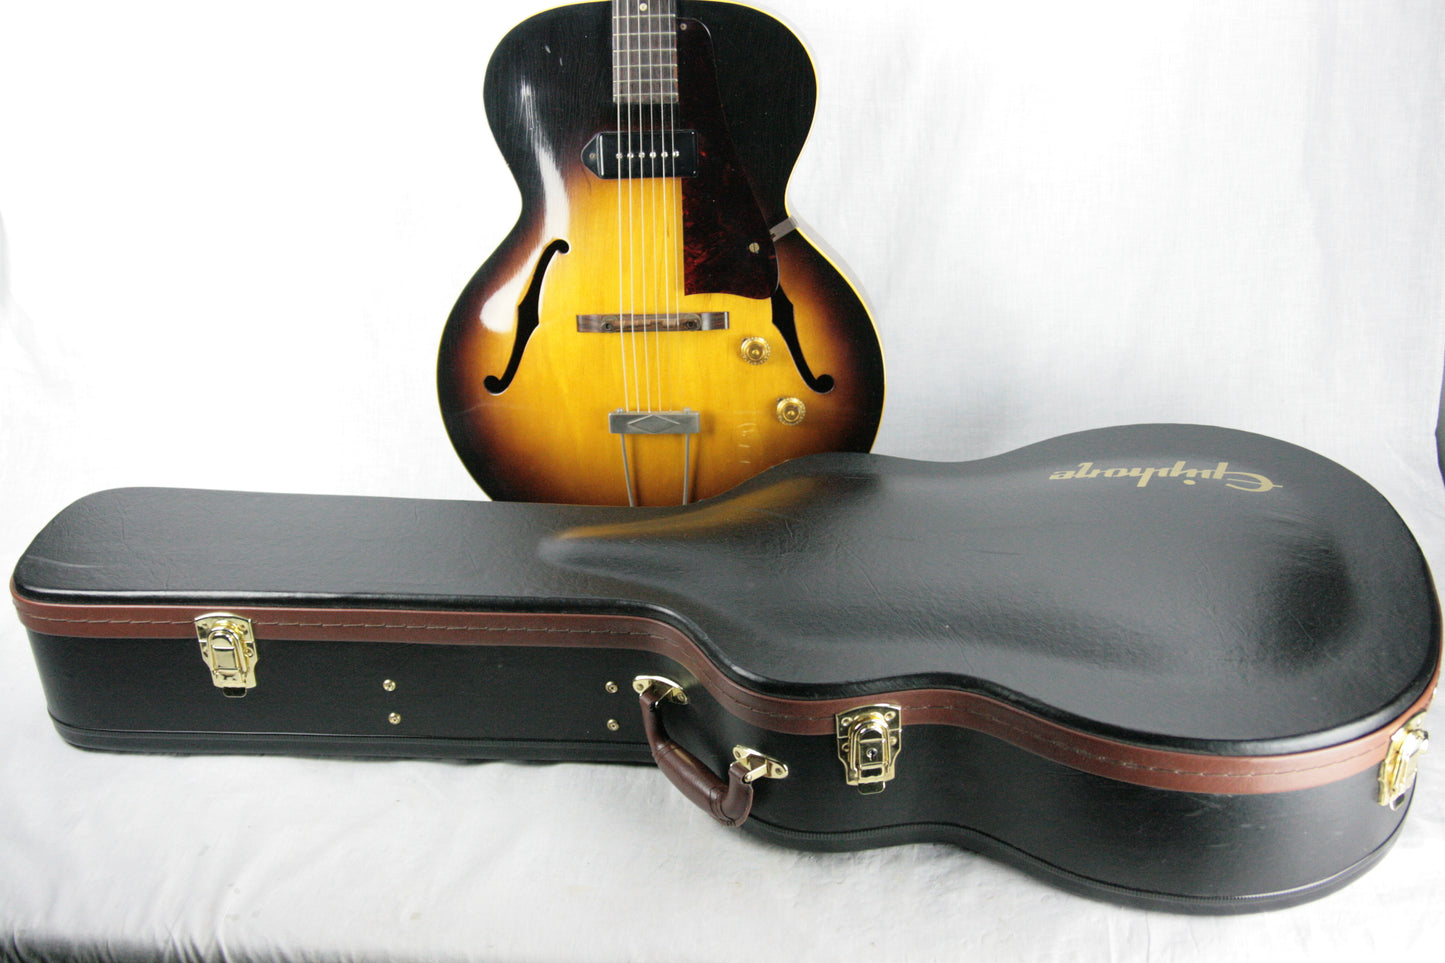 1956 Gibson ES-125 Full-Body Archtop Electric P90! Vintage 335 225 1950's